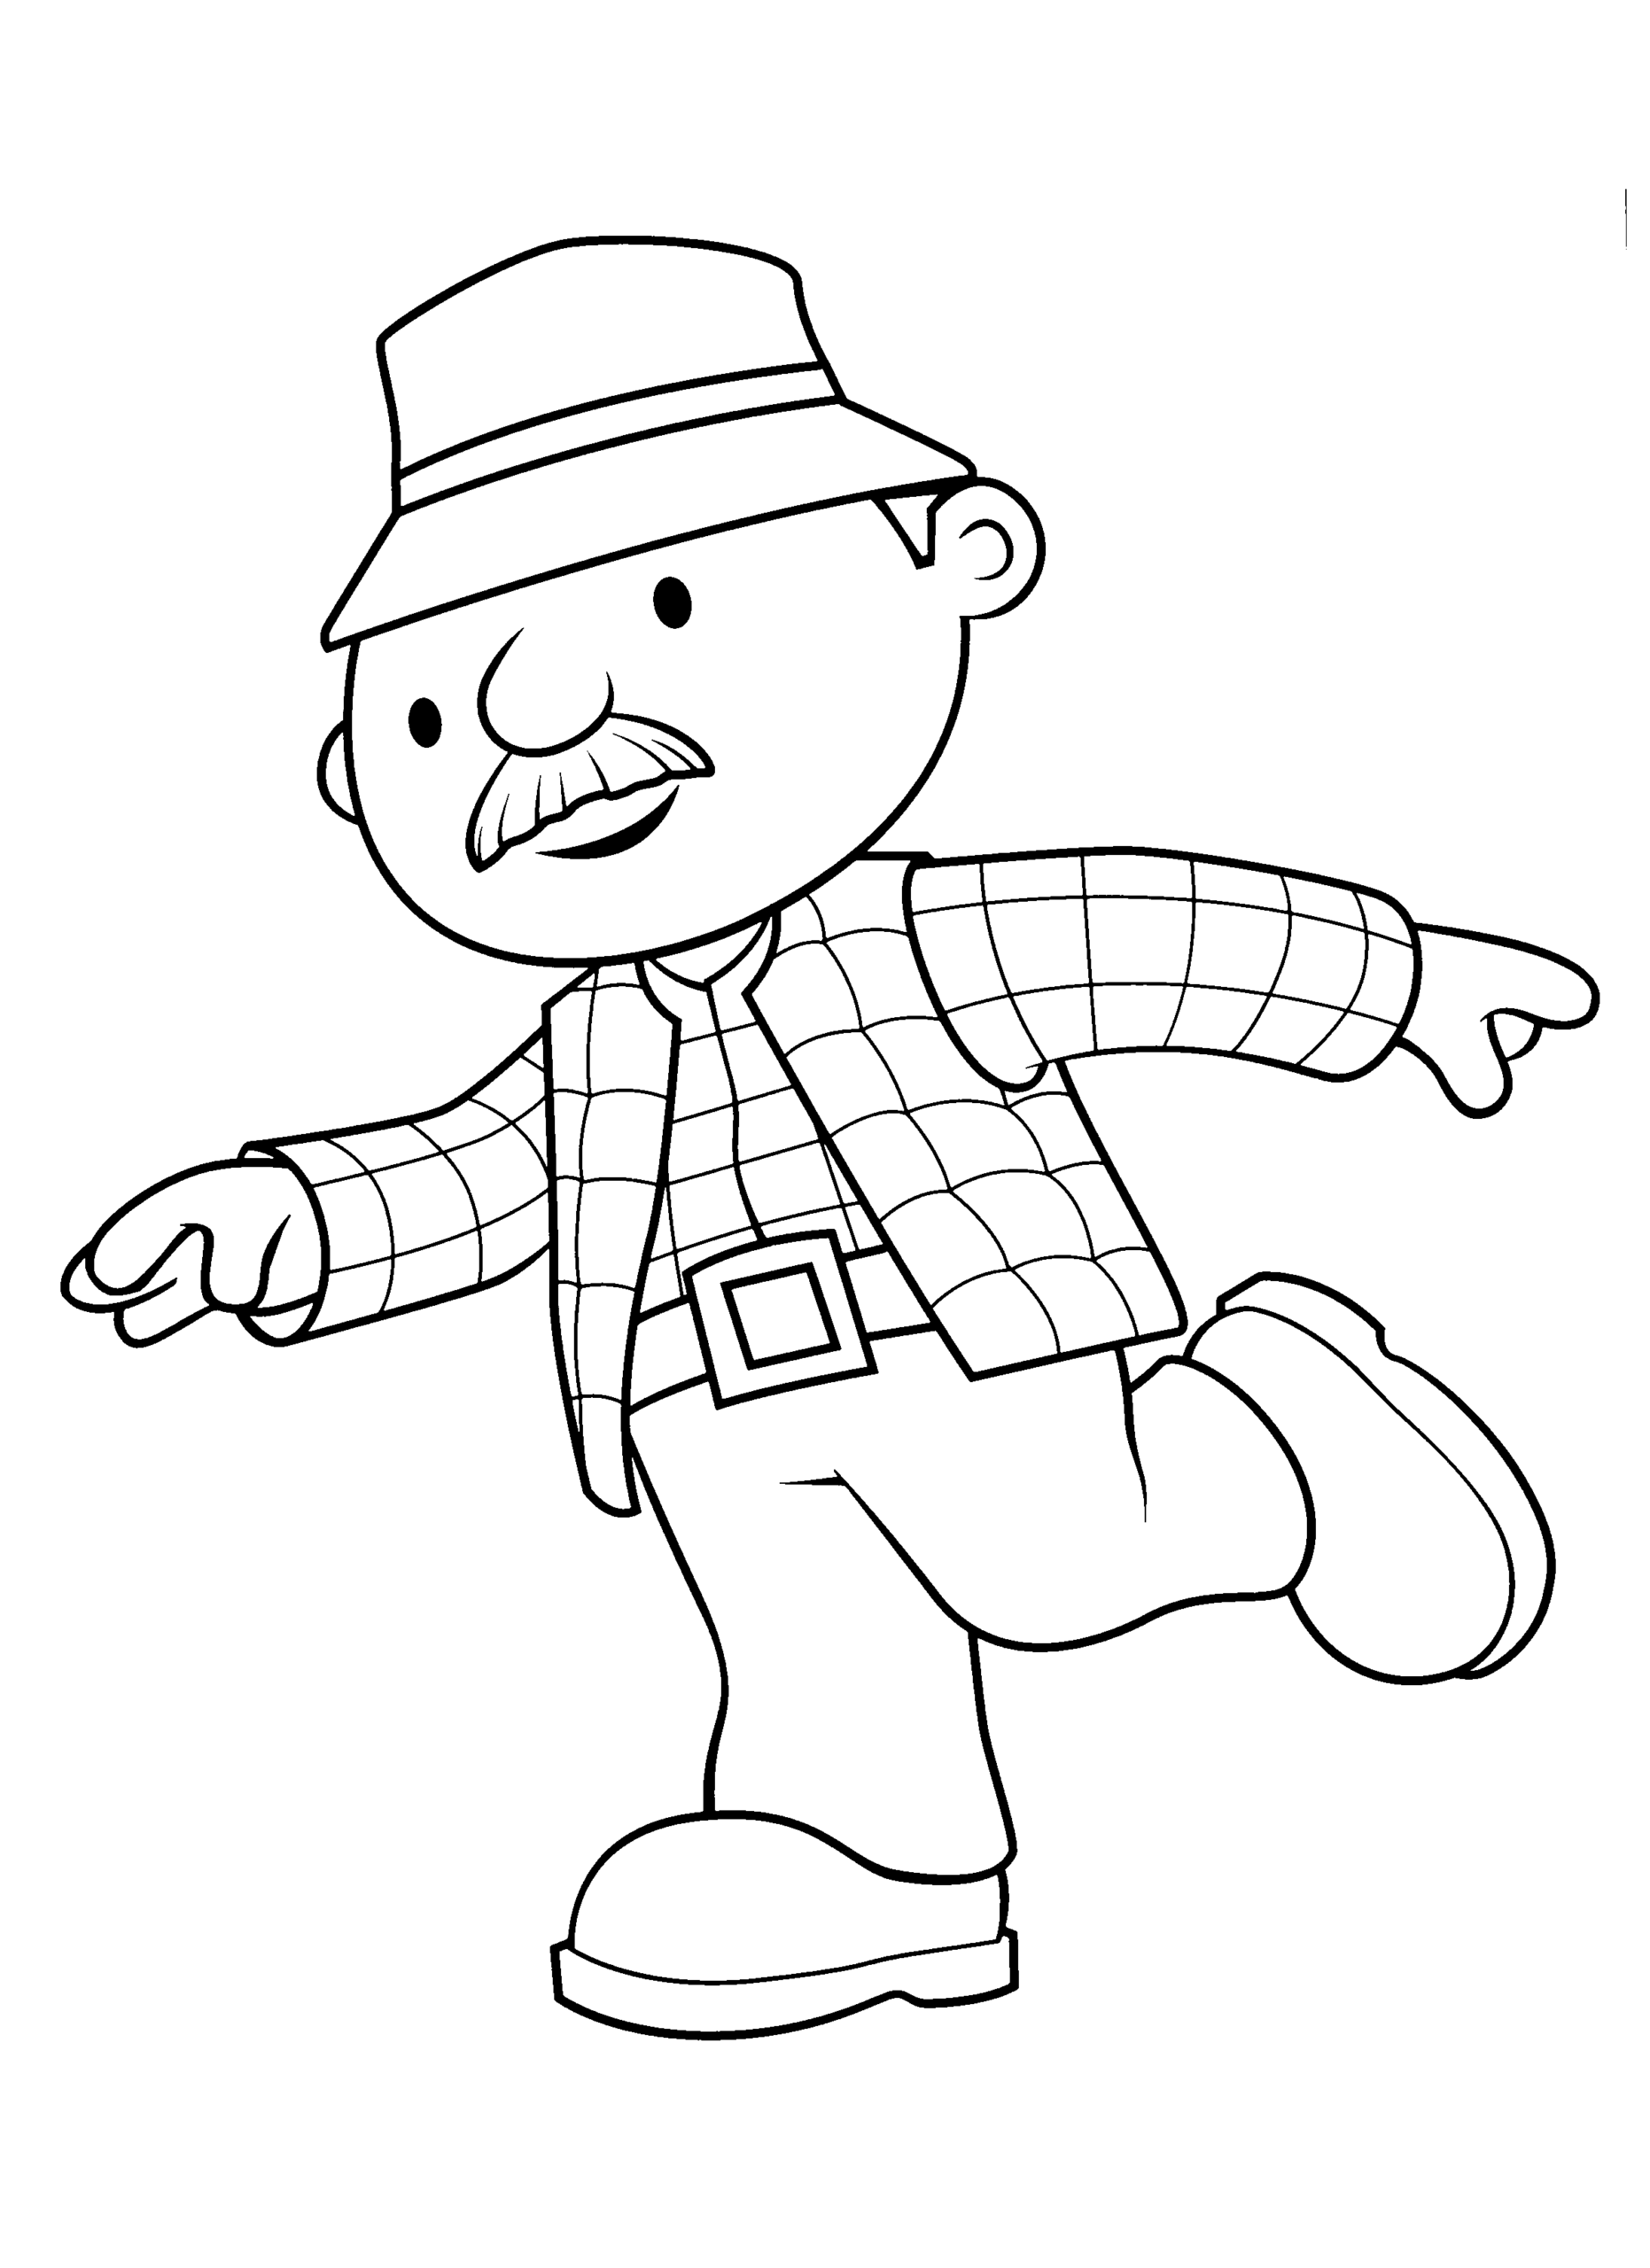 Bob the Builder Coloring Pages TV Film bob the builder 22 Printable 2020 01039 Coloring4free